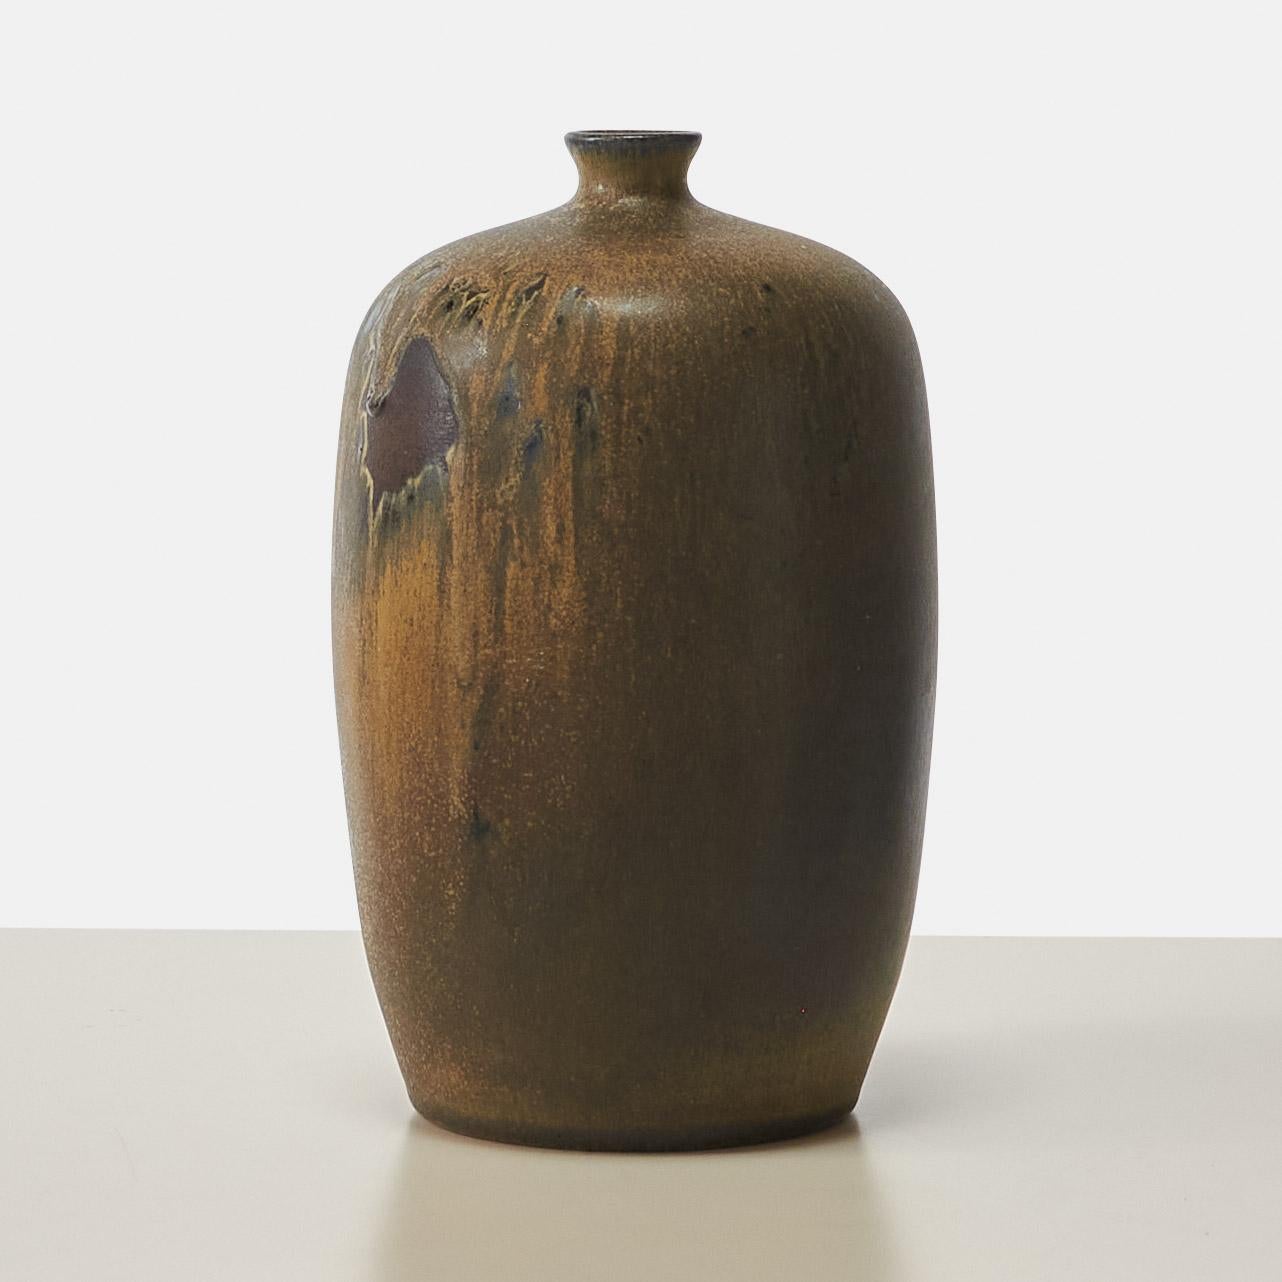 A ovoid brown glazed stoneware vase with a narrow mouth by Swedish ceramicist Åke Holm. 
Signed on base.